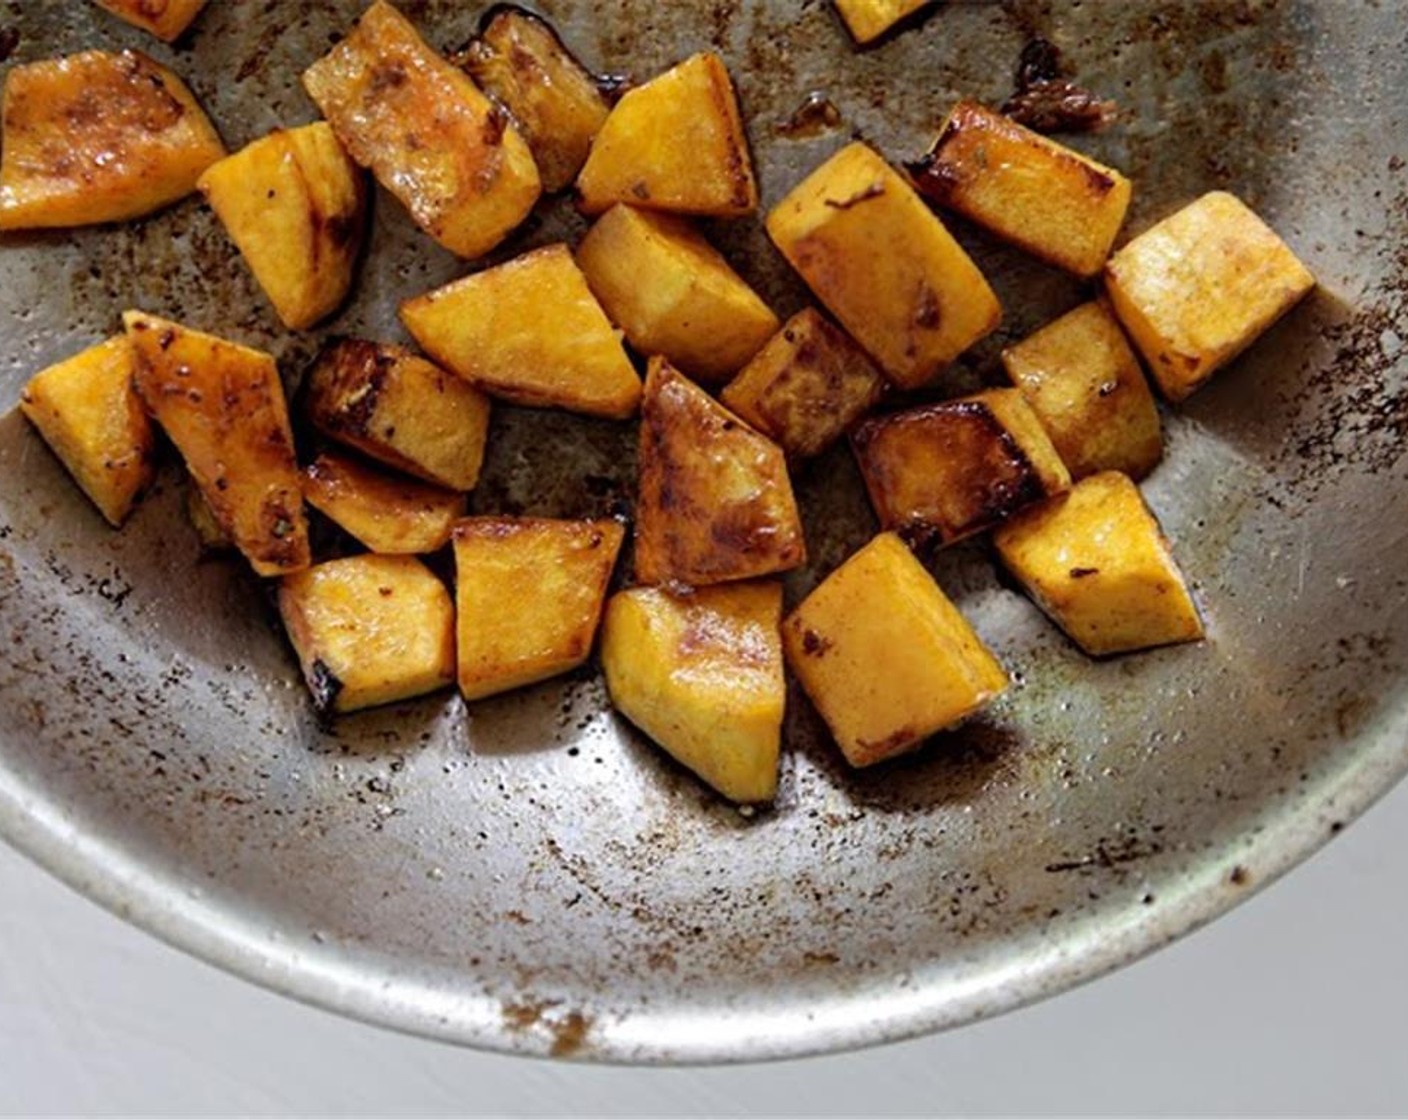 step 2 In a medium-large saucepot over medium-high heat, add 4 cups of Water. While waiting for water to boil, place a large sauté pan over high heat, and add small butternut squash, 2 cups of Water, and Olive Oil (1 Tbsp).